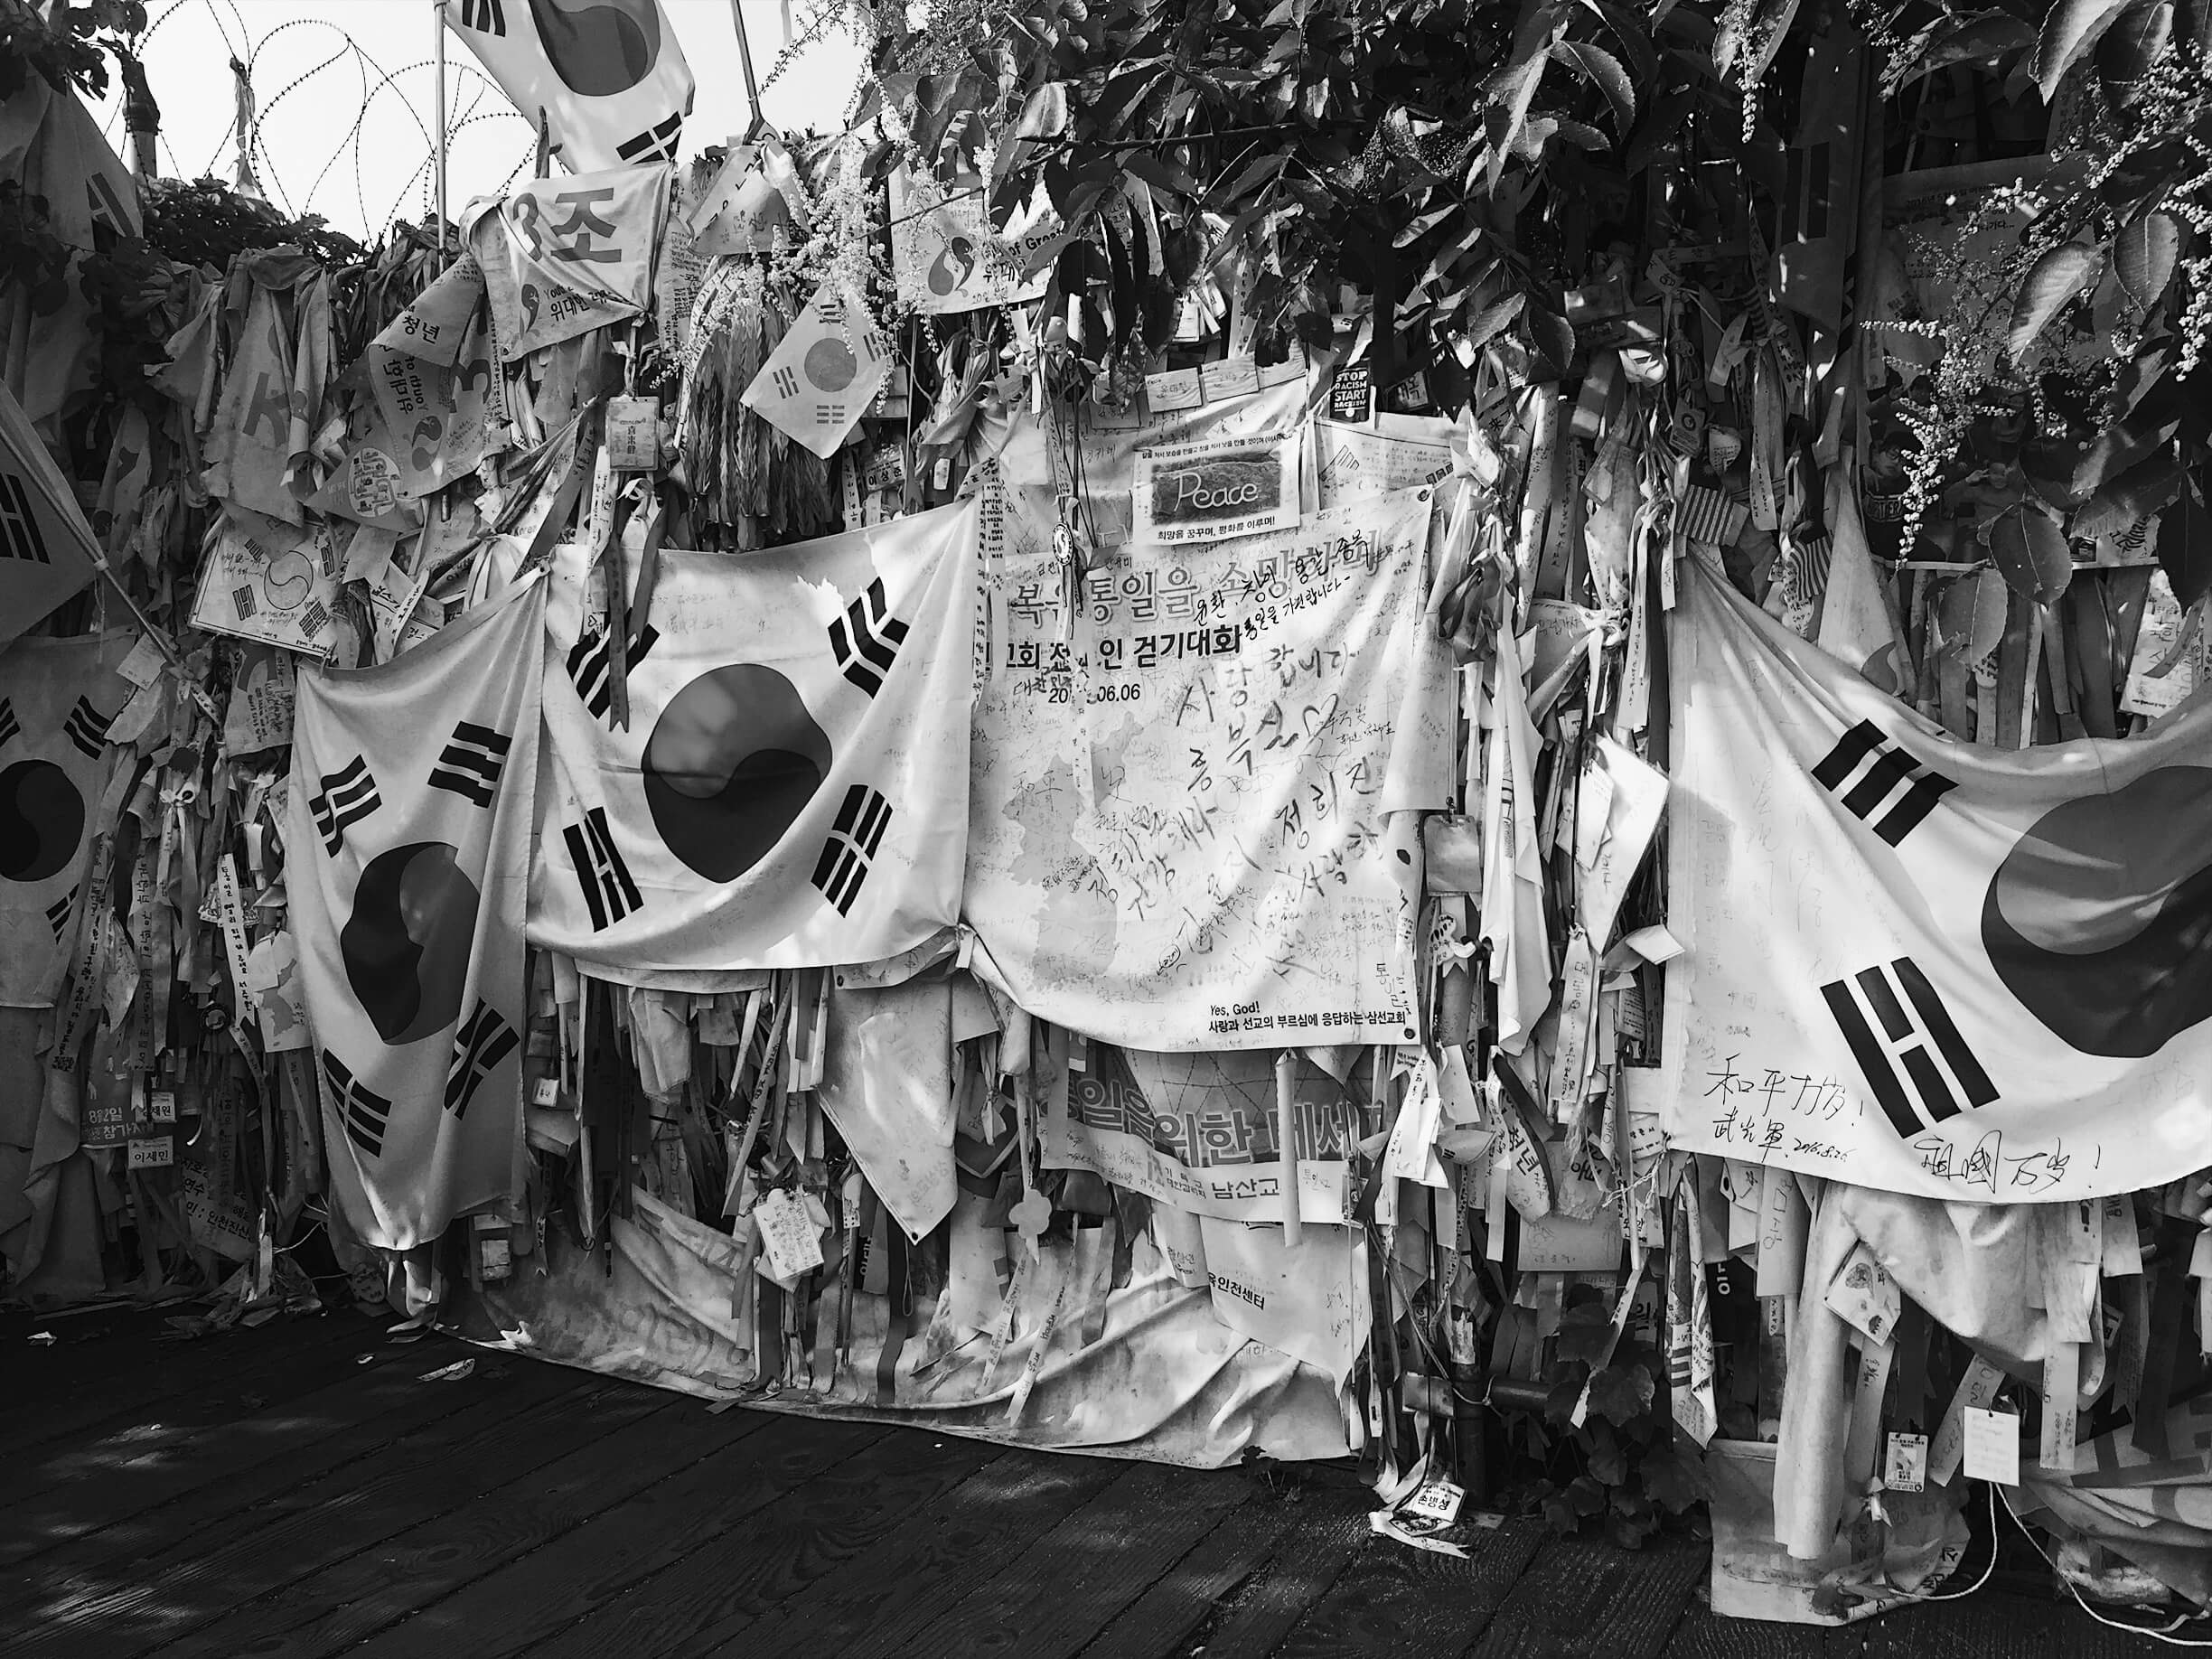 Korean flags and other ribbons,
              tags, and posters tacked onto a wall.